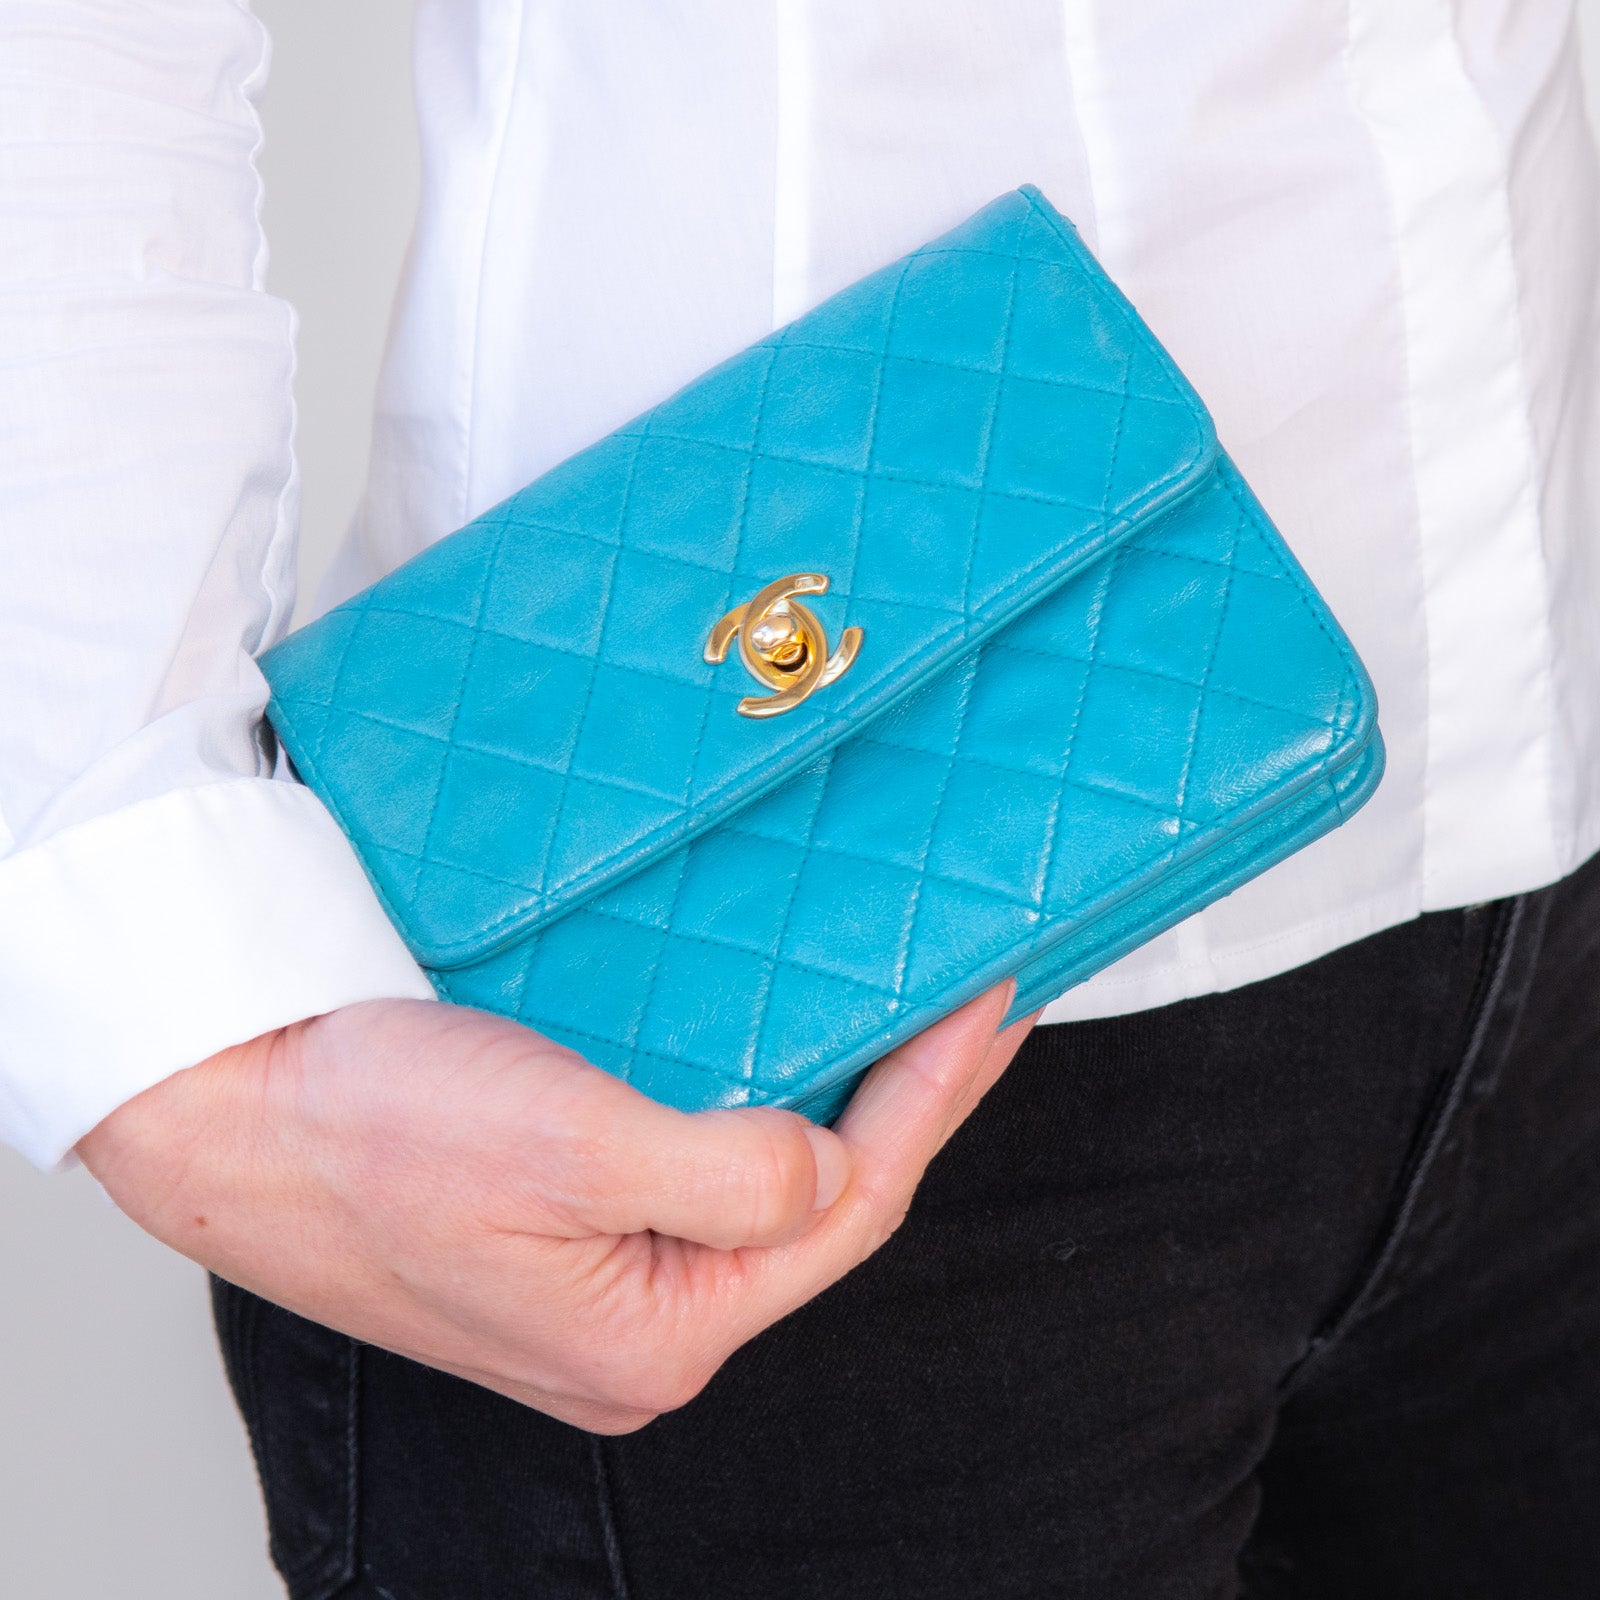 Chanel Turquoise Clutch On Chain Bag - Image 9 of 9